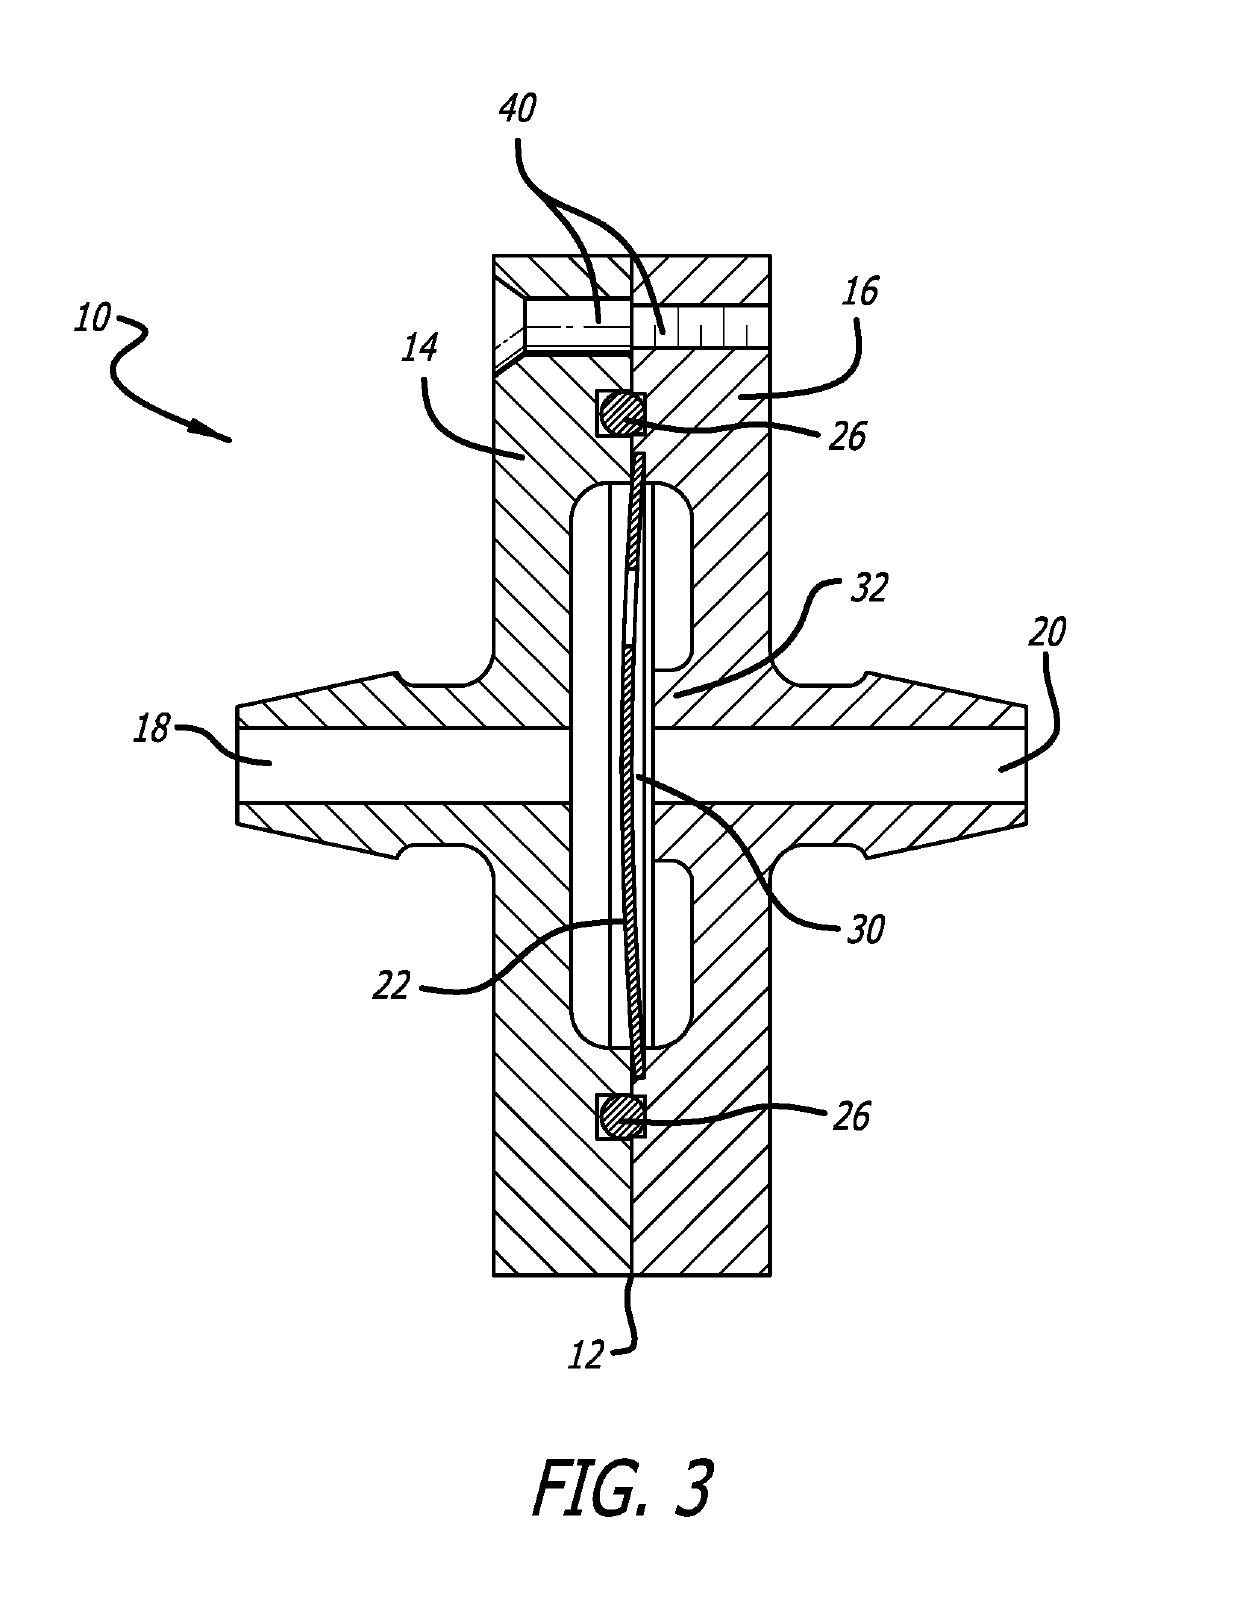 Thermally-actuated flow-restrictor device for aircraft beverage maker